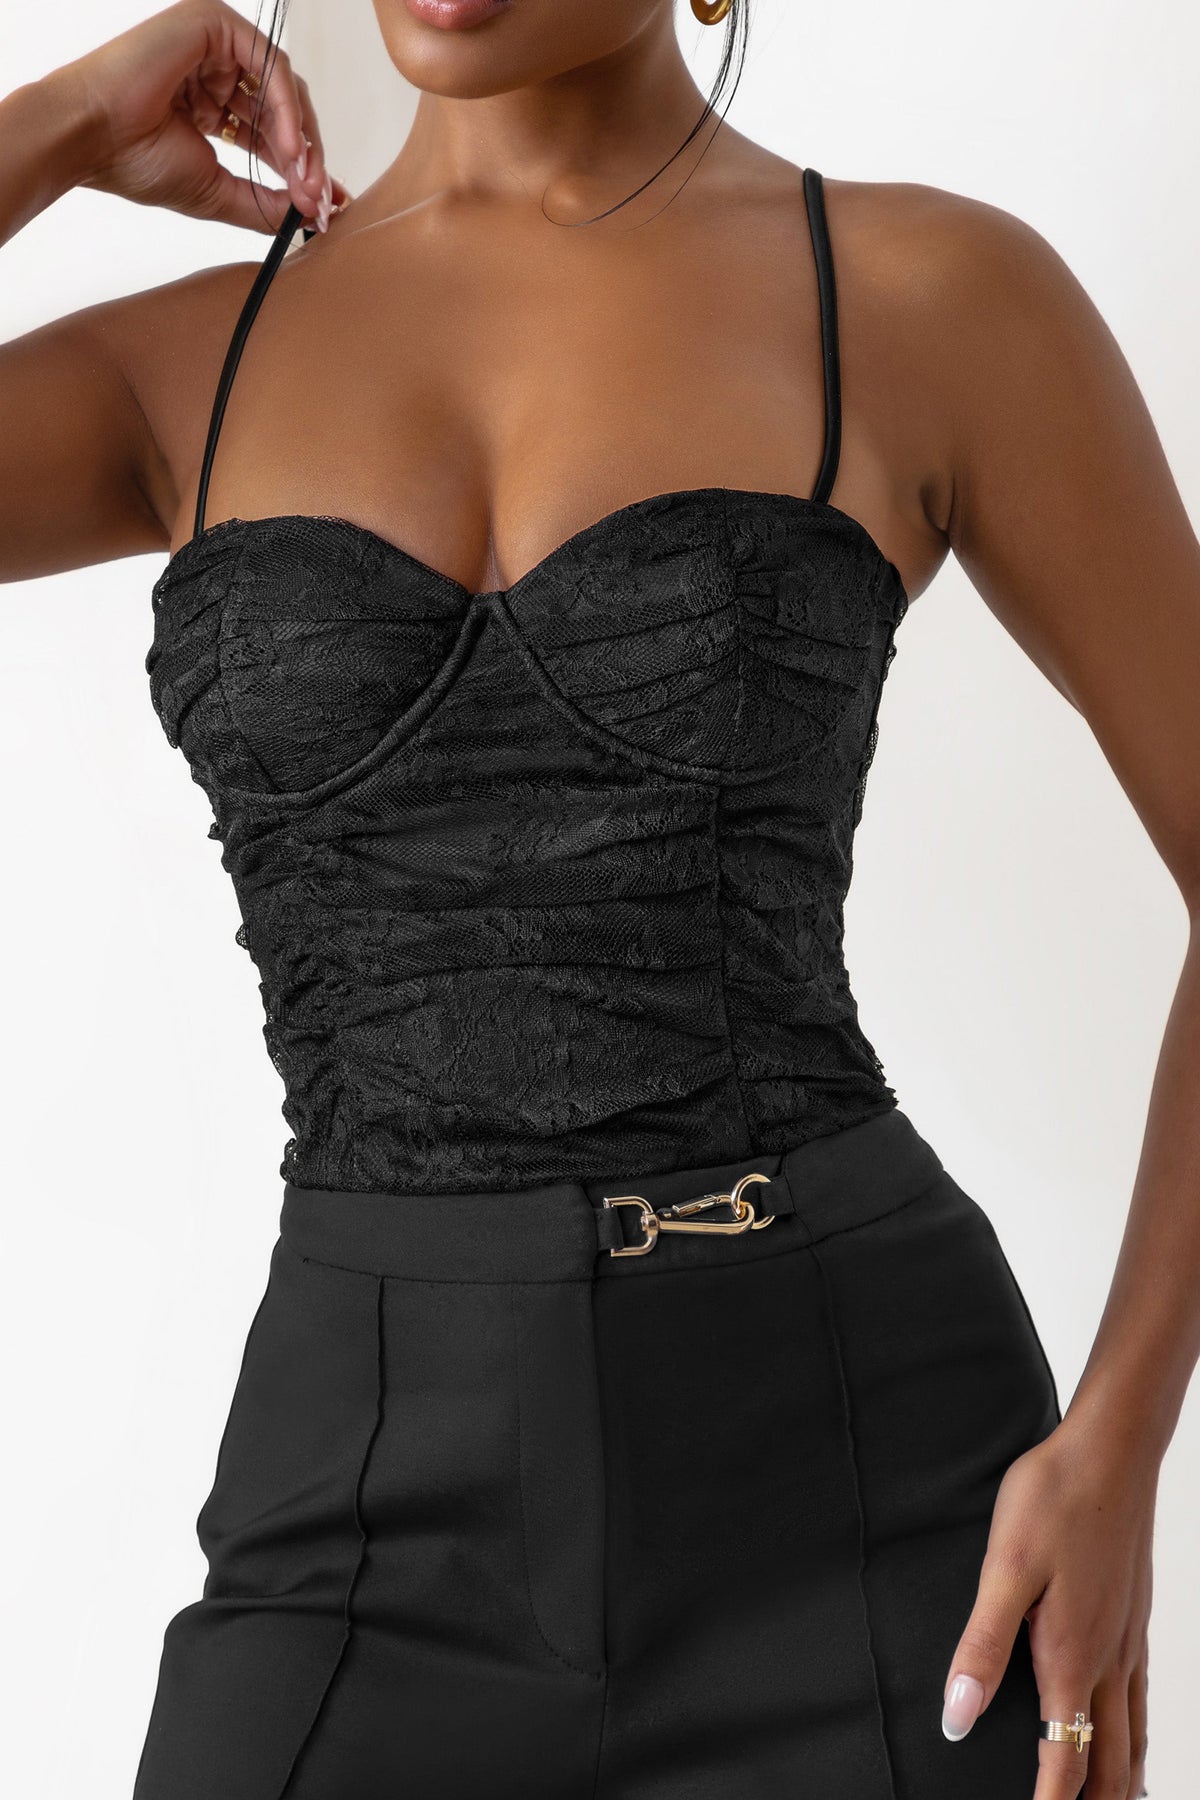 Hold You Up Ruched Underwire Corset - Black